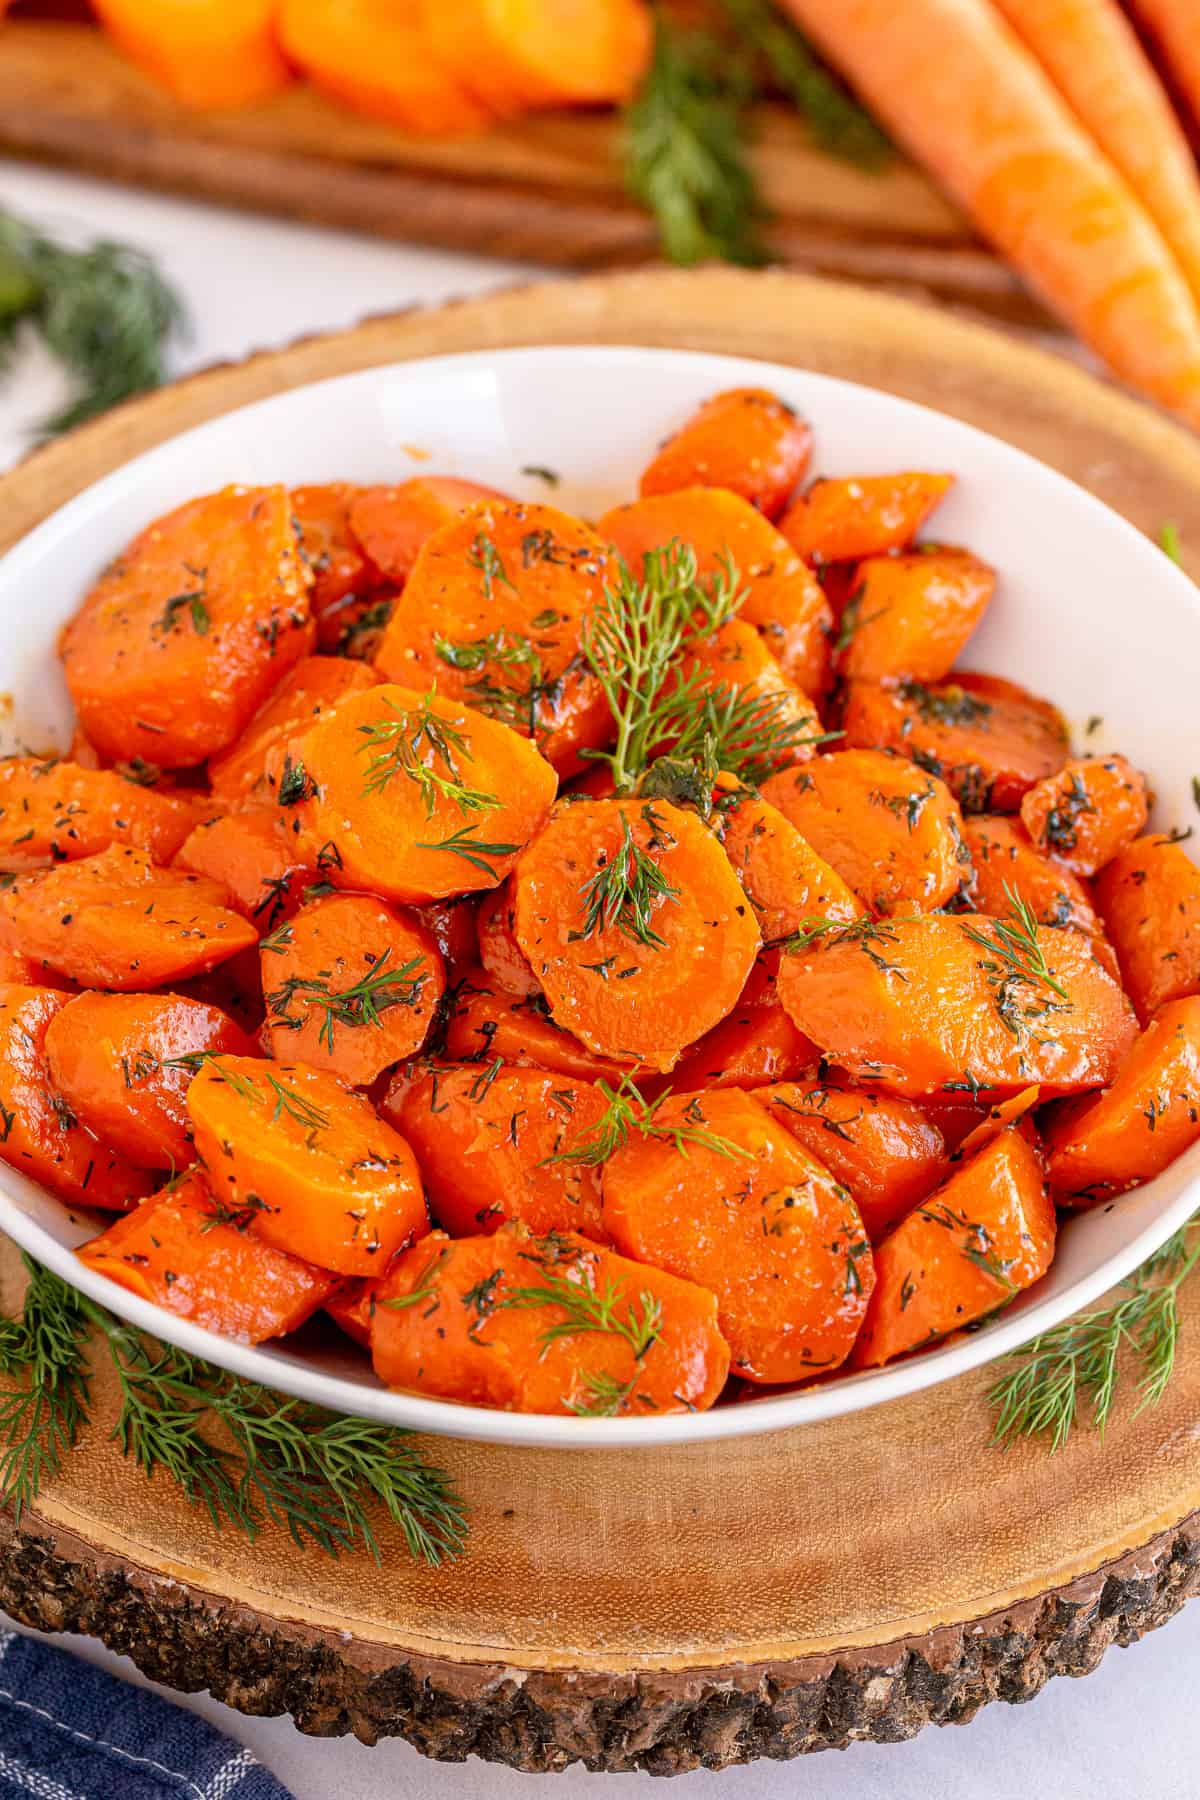 Butter and dill glazed carrots in a white bowl on a wooden block.